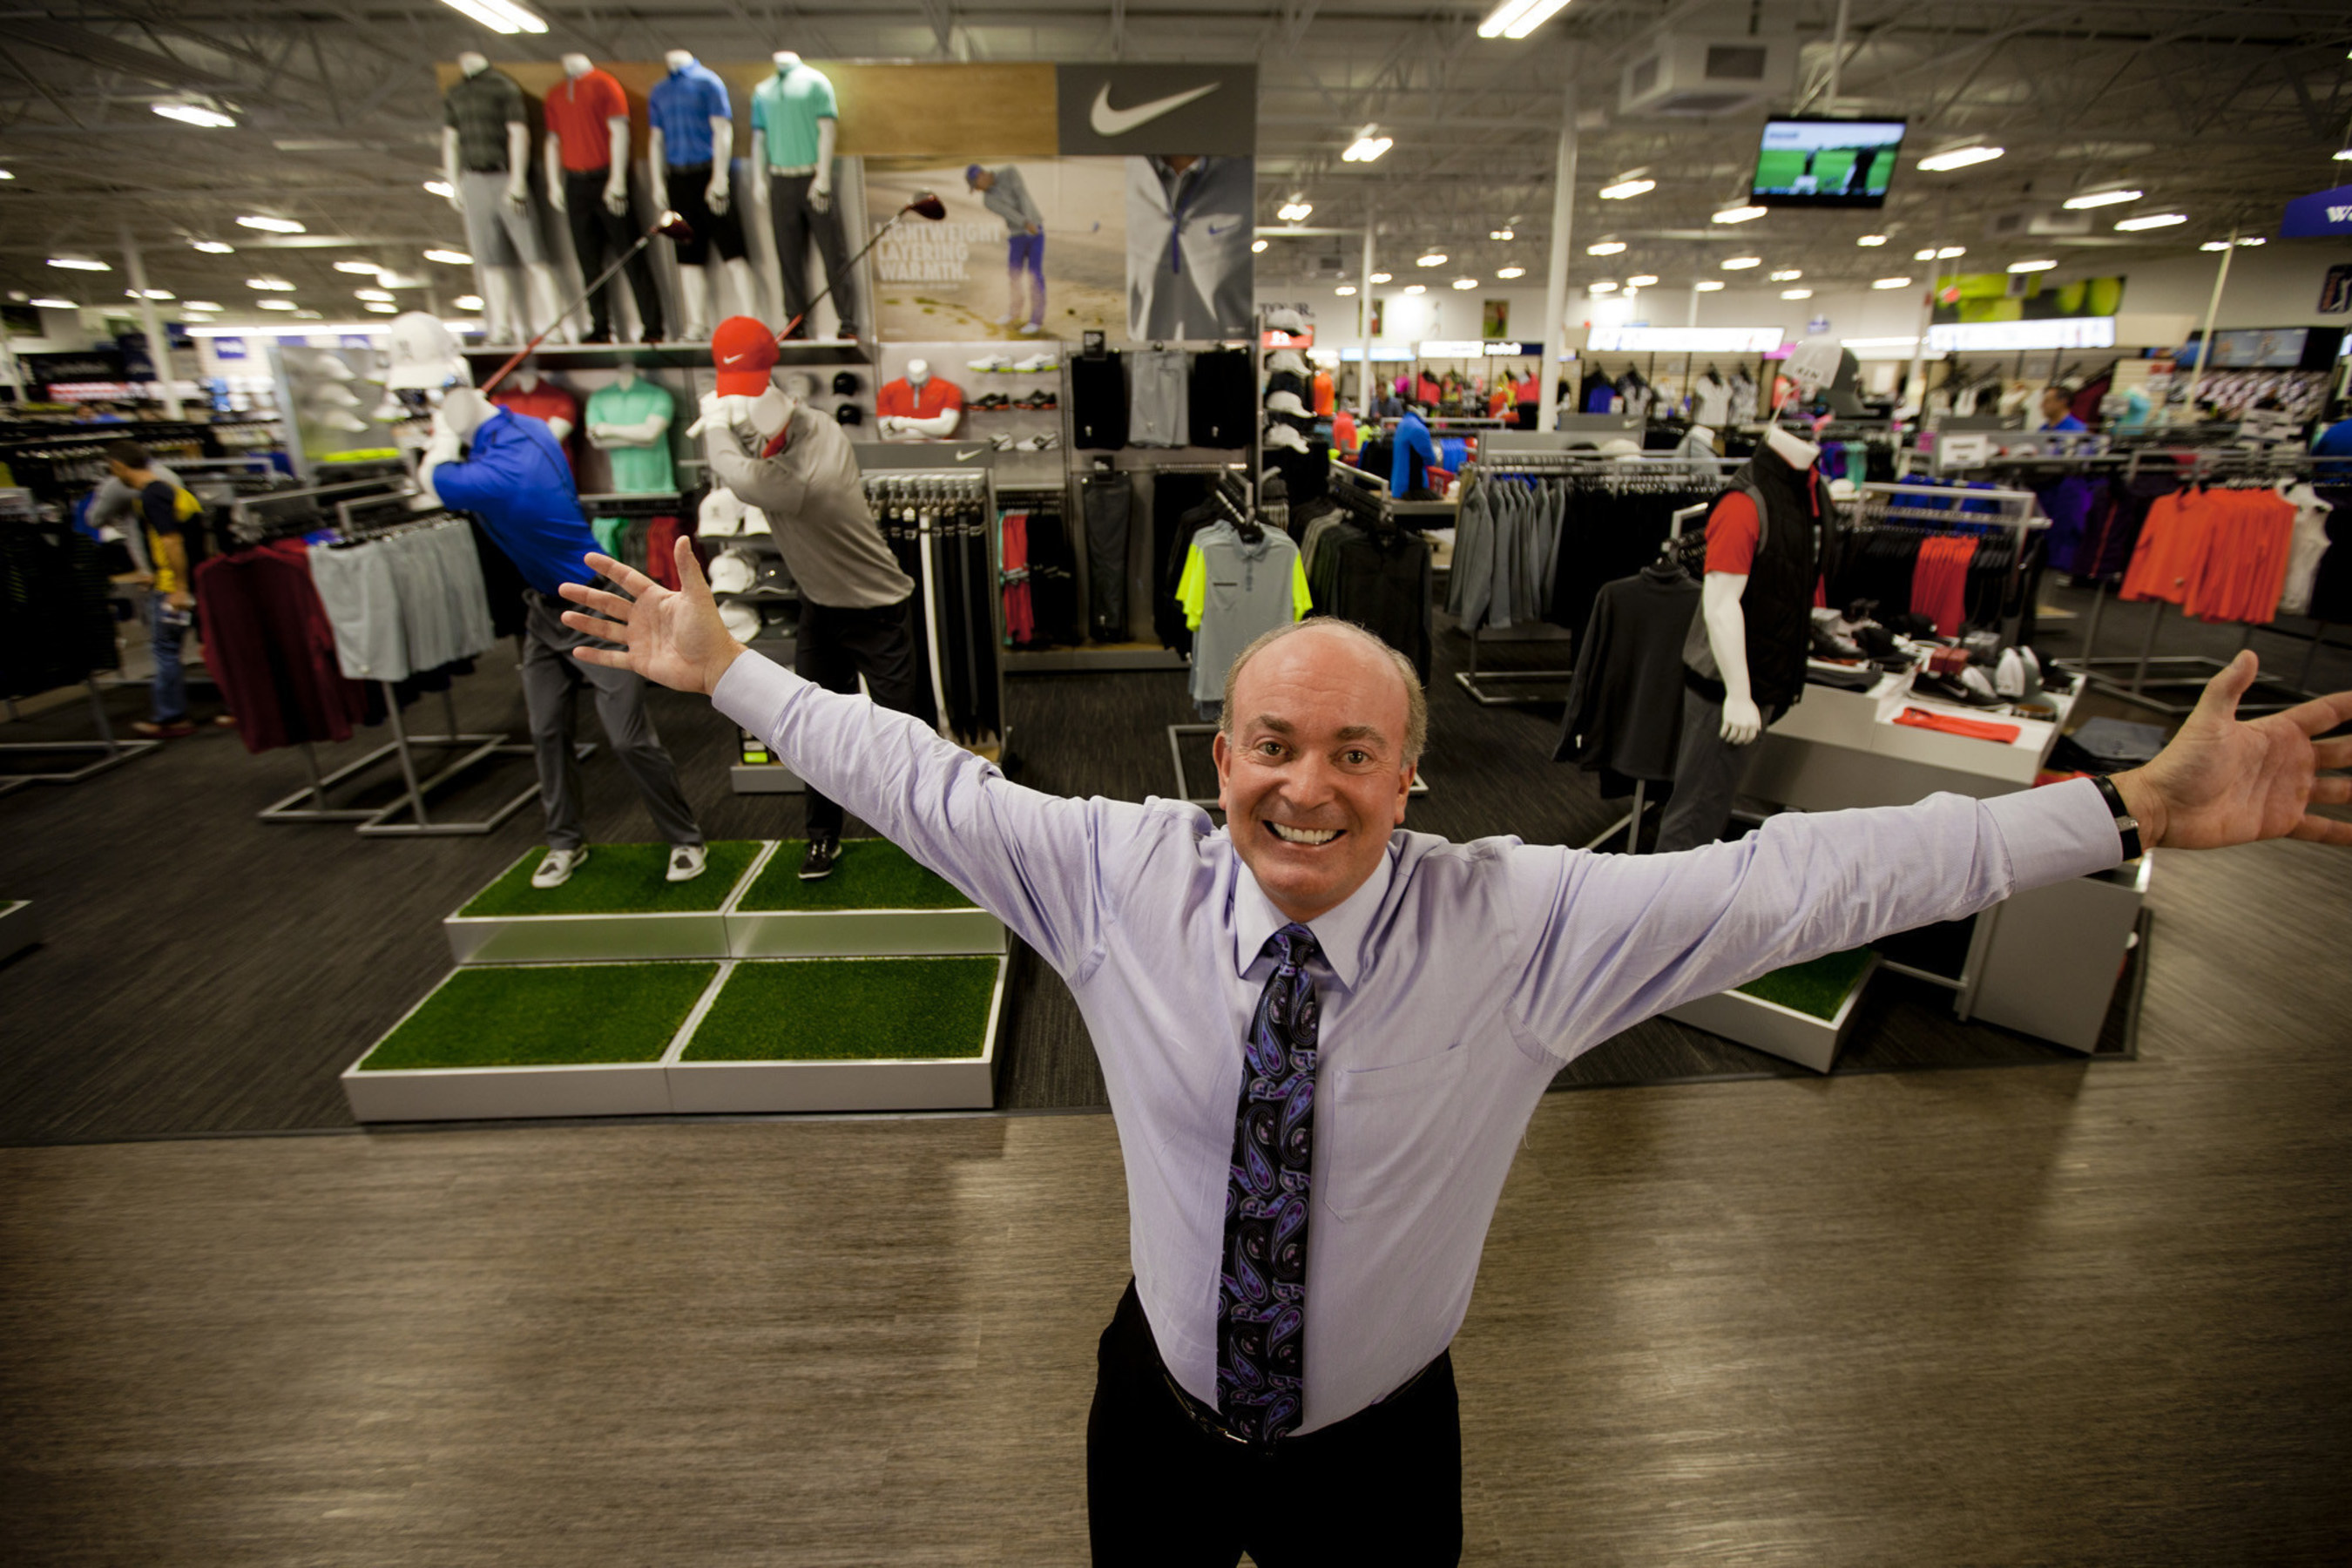 PGA TOUR Superstore CEO & President Dick Sullivan at the company's new 50,000 square foot store in Orlando, located less than a mile from Golf Channel's headquarters. The two industry leaders in golf have signed a multi-year,  national deal including a brand integration program and a strategic media buy.